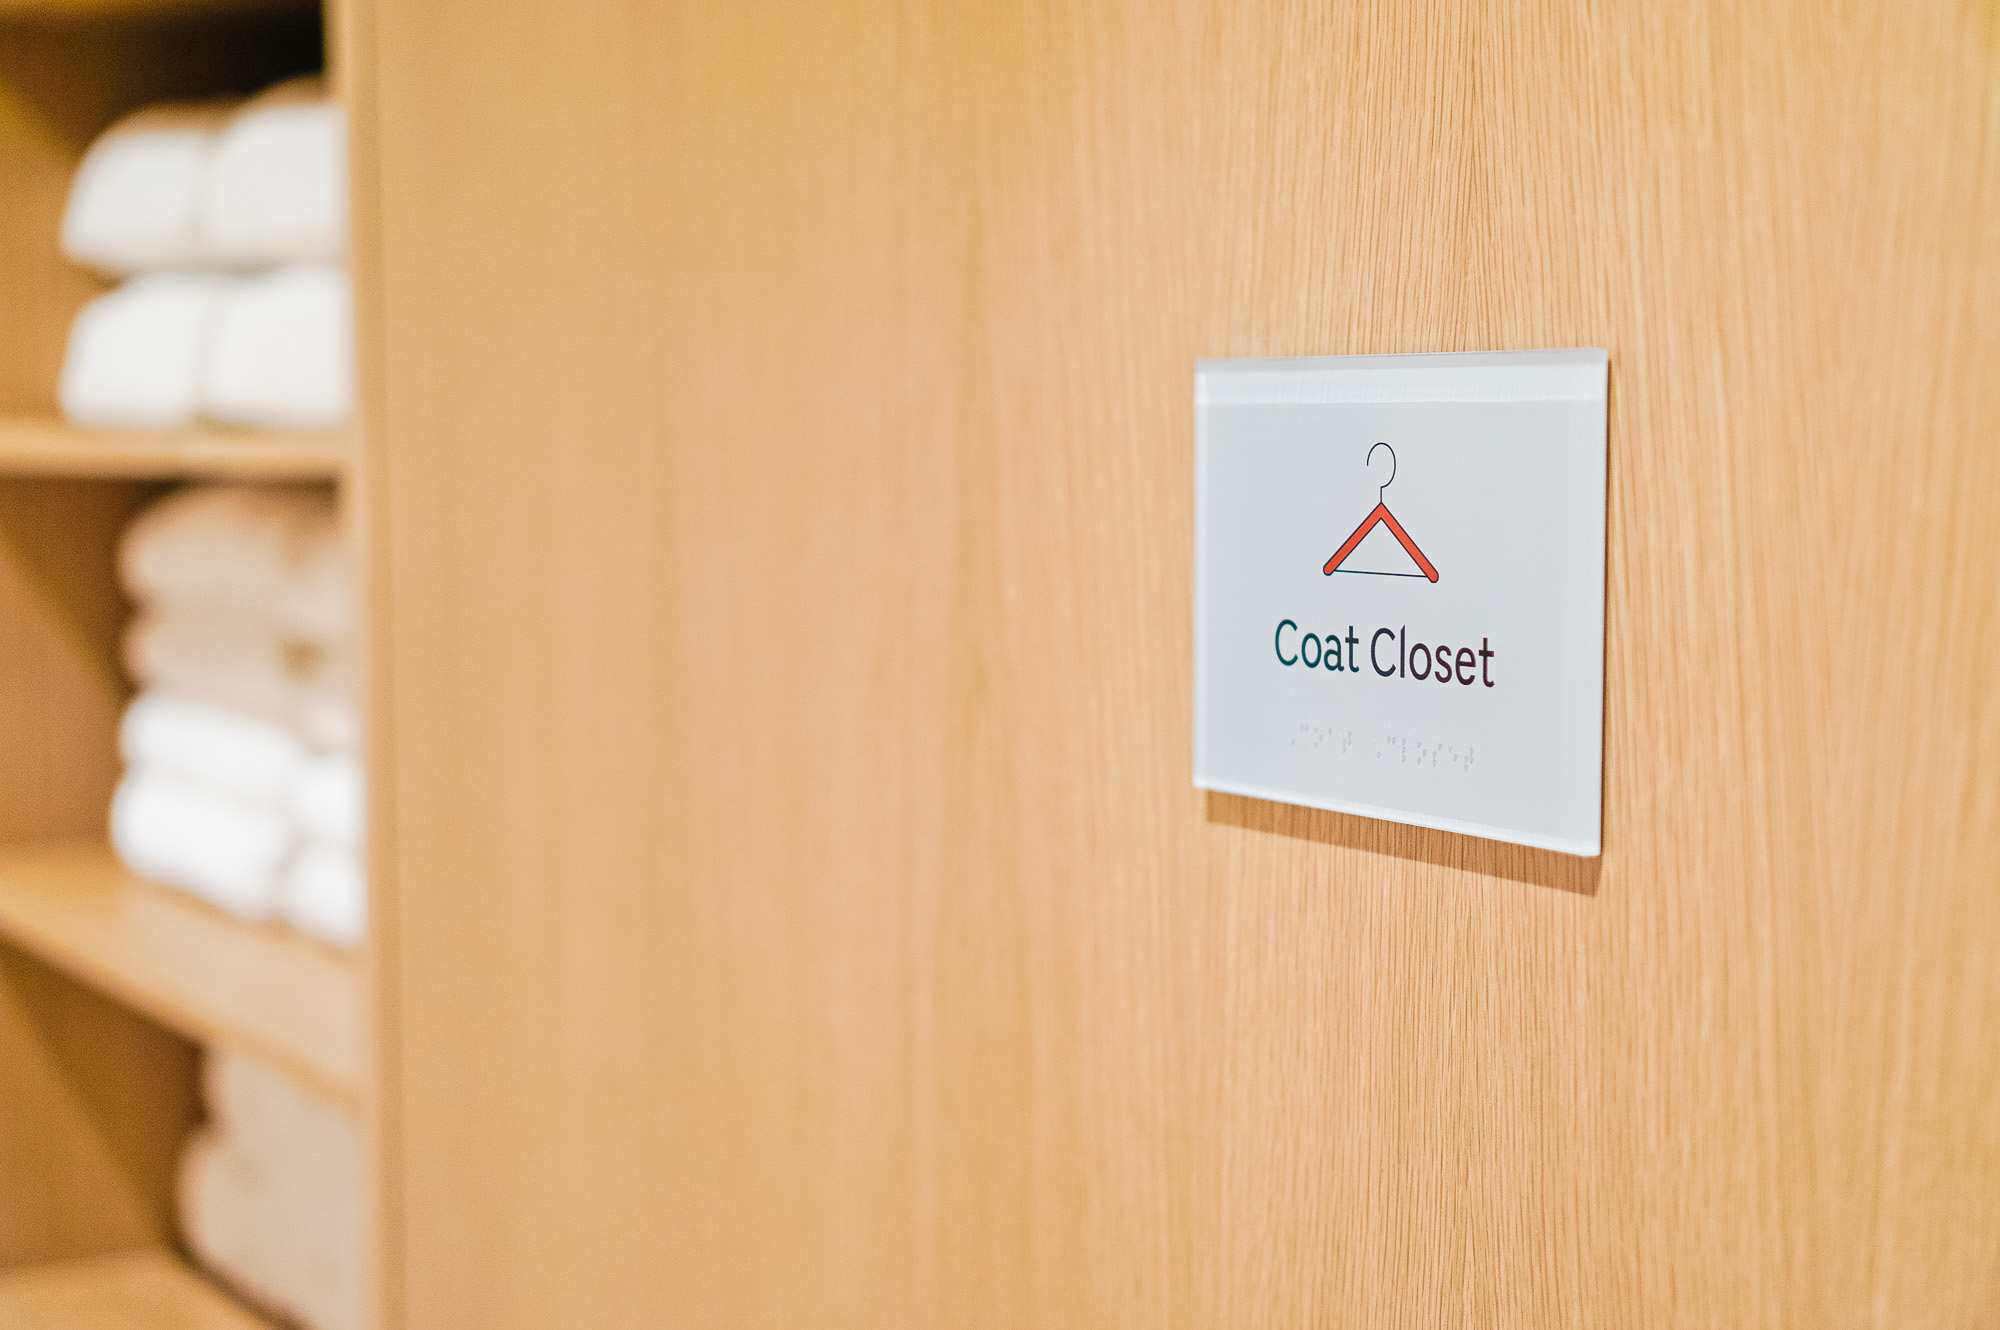 The Coat Closet Sign at The Wing San Francisco, a co-working space for women.